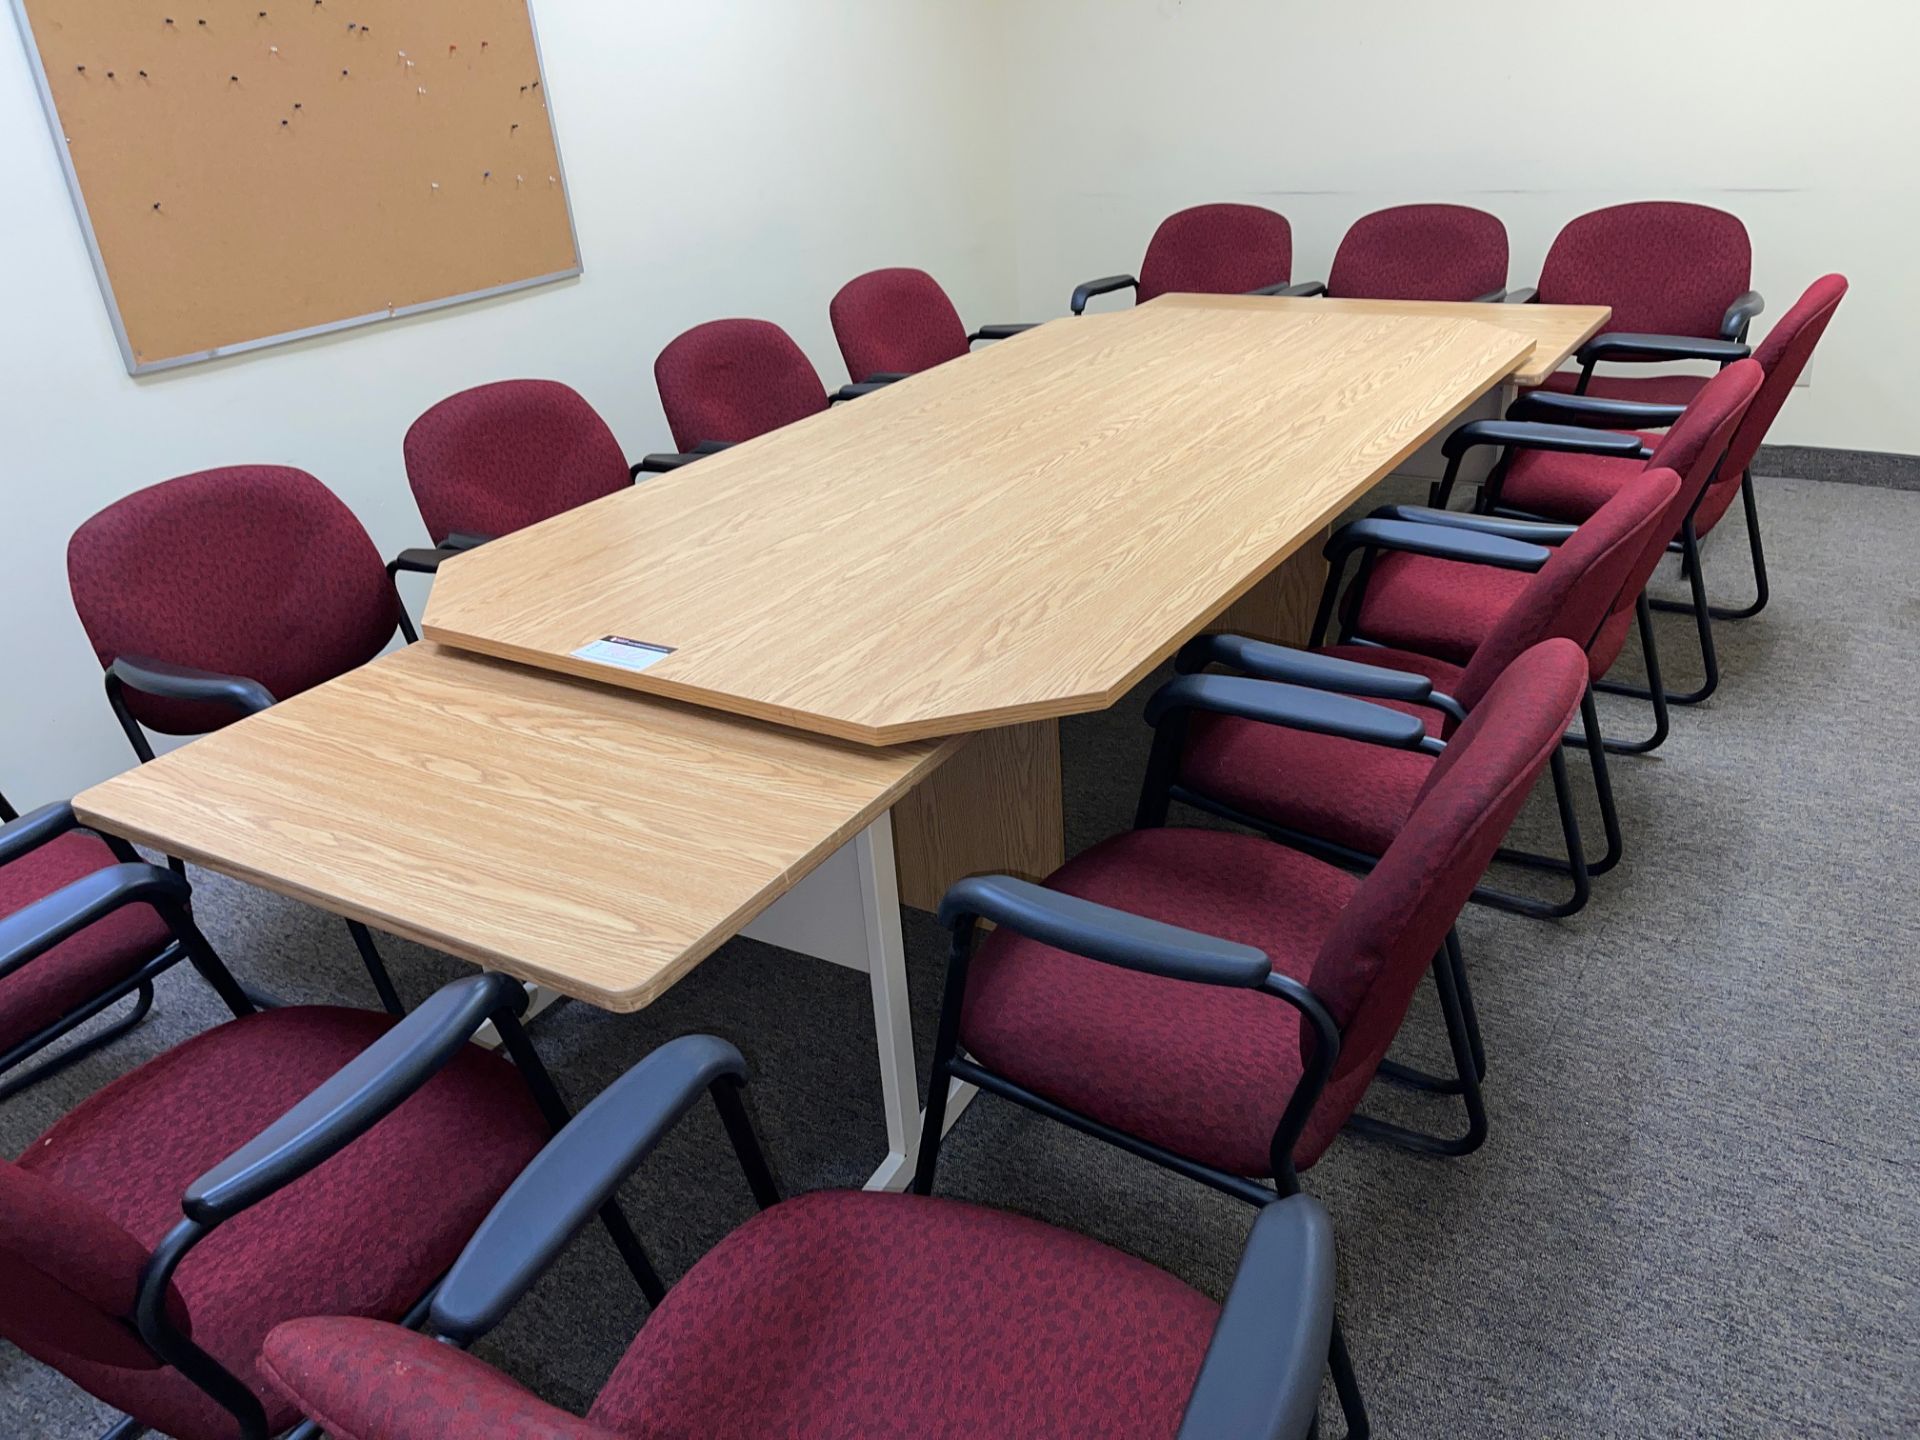 LOT/ 8' LONG TABLE WITH (2) END DESKS, (14) RED SLED BASE ARM CHAIRS, (3) WALL BOARDS - Image 4 of 4